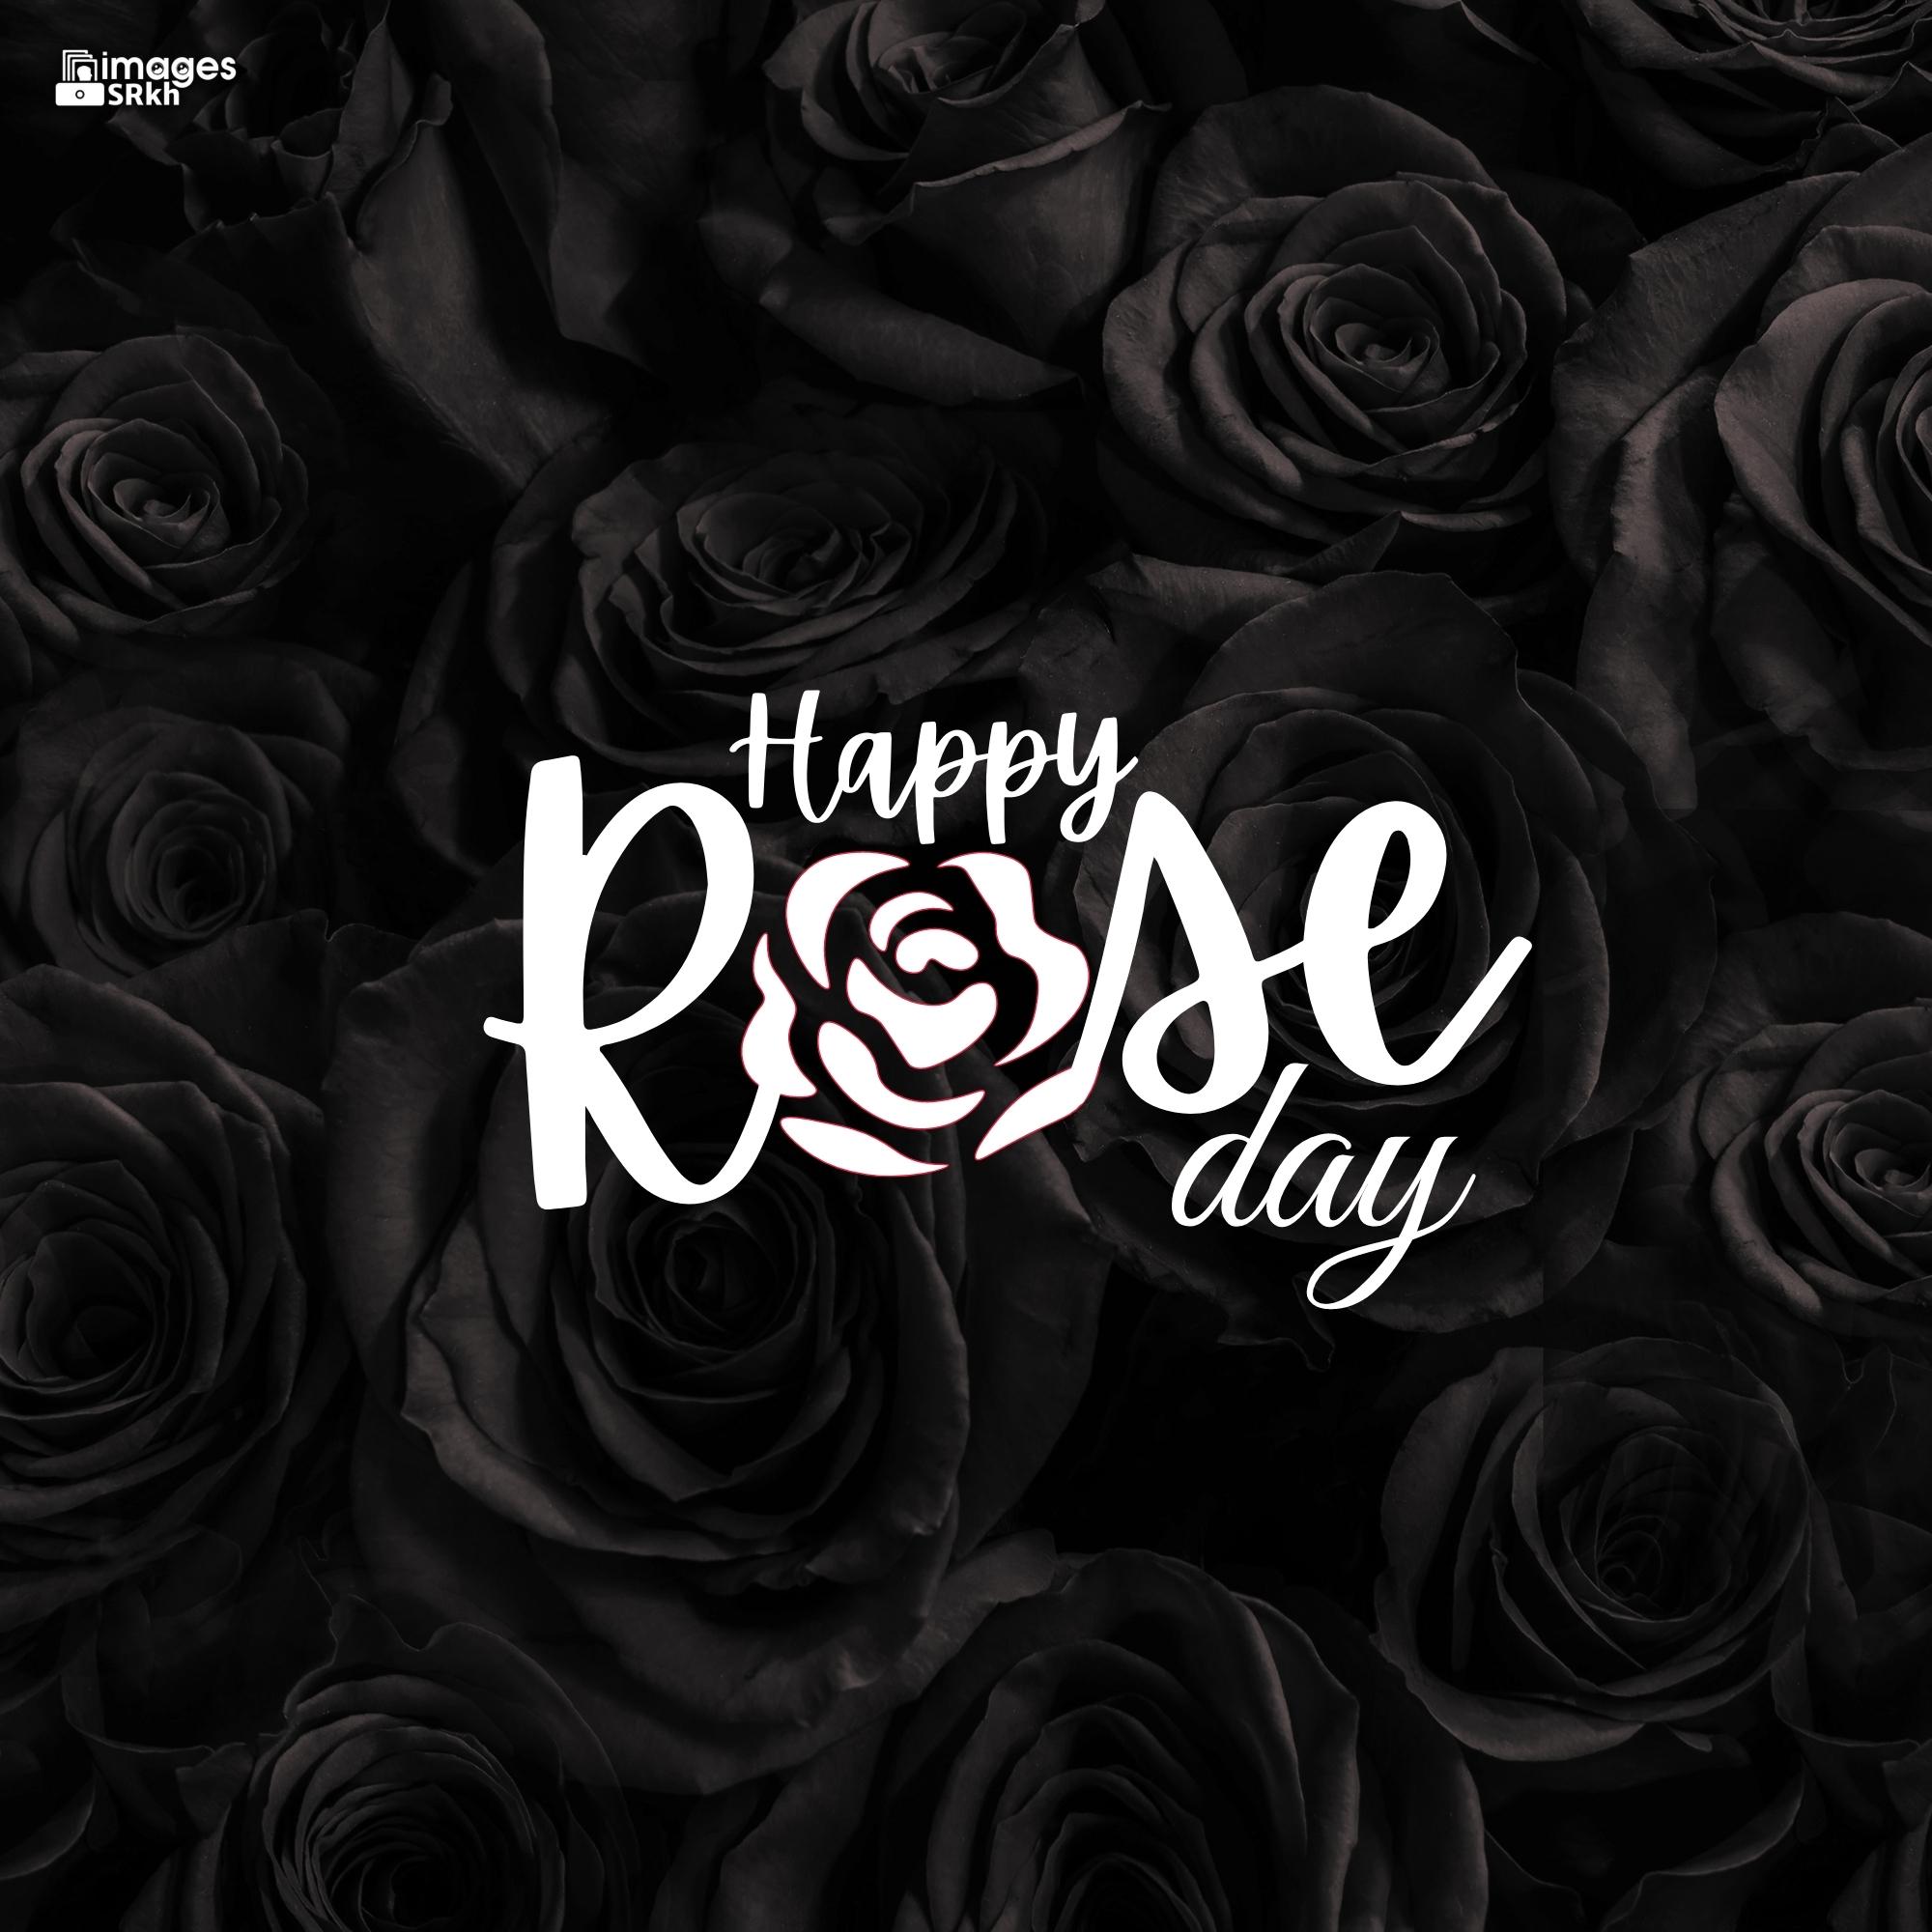 Happy Rose Day Image Hd Download (34)